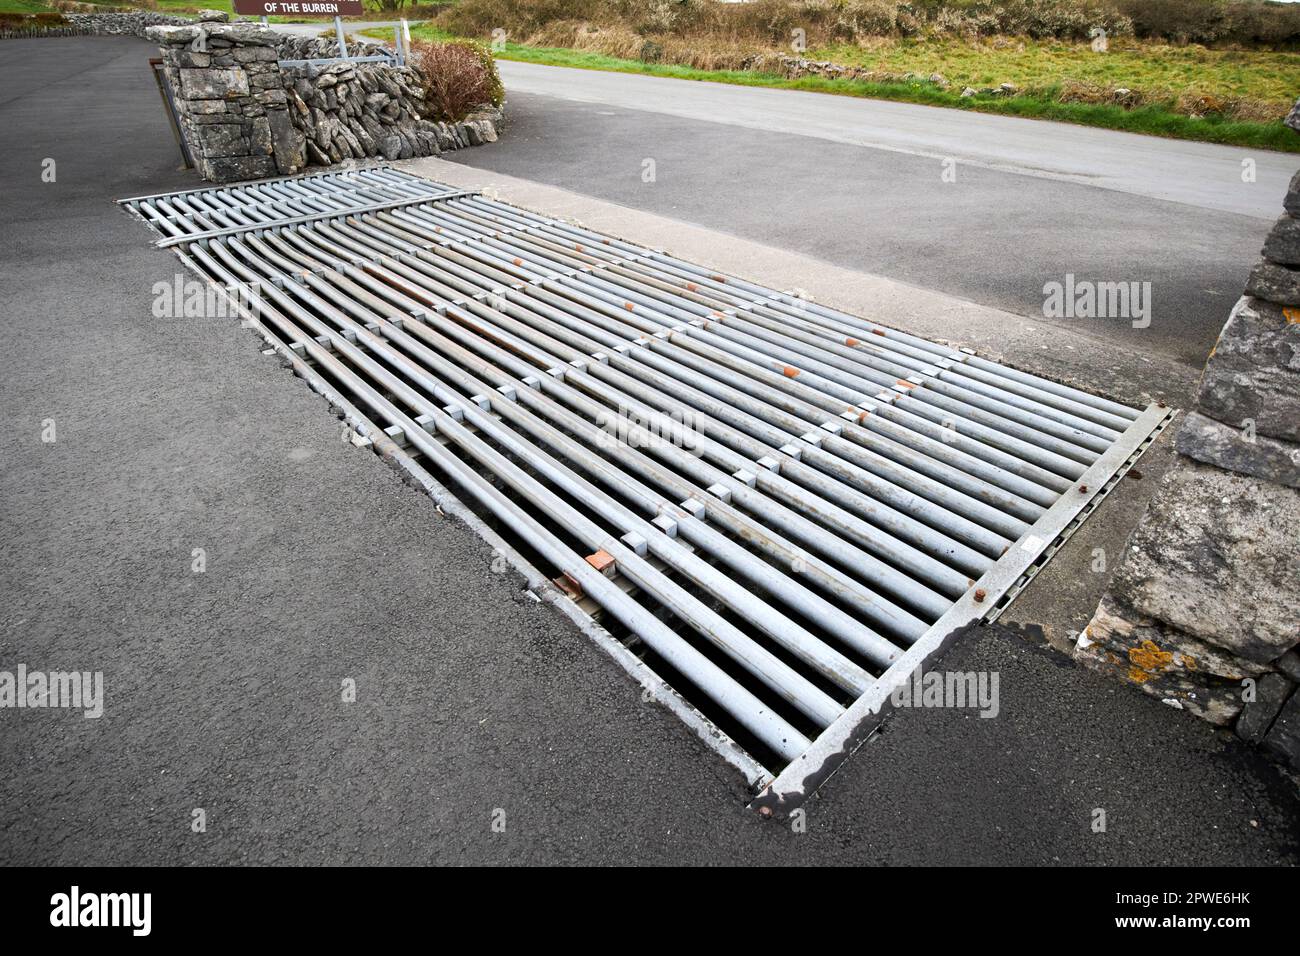 cattle grid on entrance to car park county clare republic of ireland Stock Photo